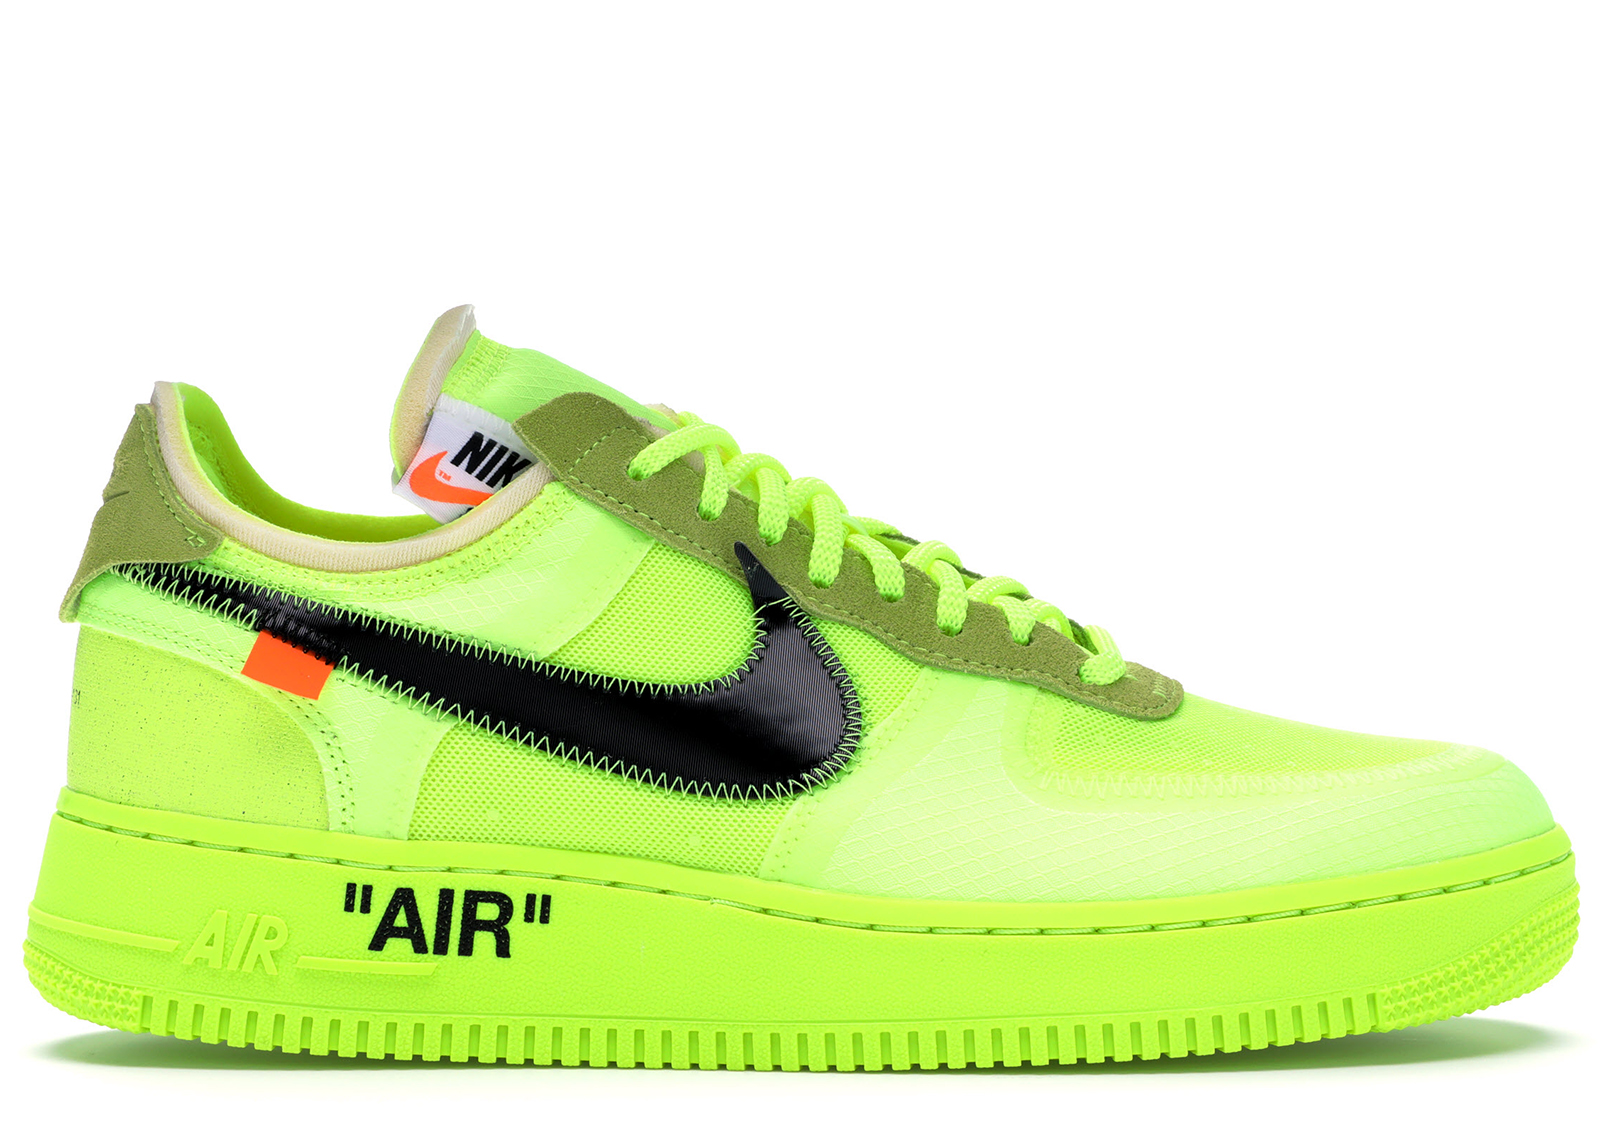 off white air force 1 high top